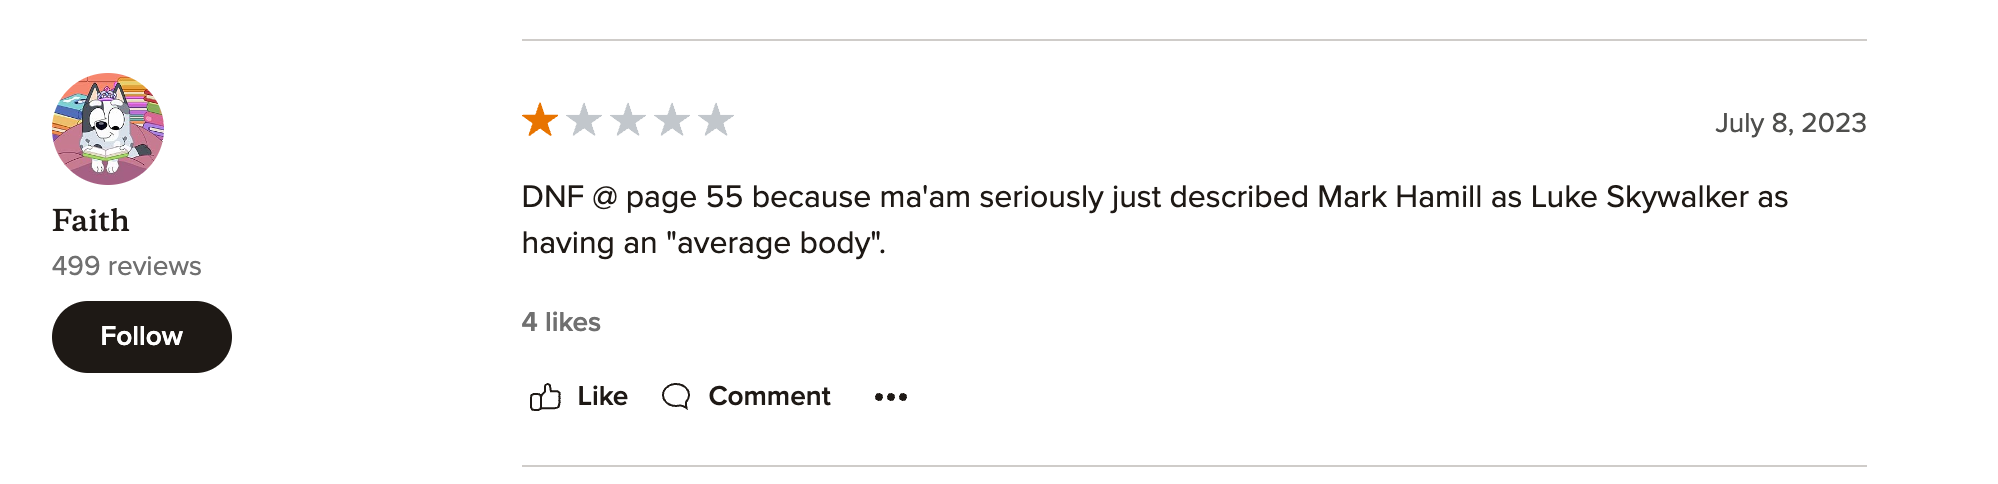 DNF @ page 55 because ma'am seriously just described Mark Hamill as Luke Skywalker as having an "average body".